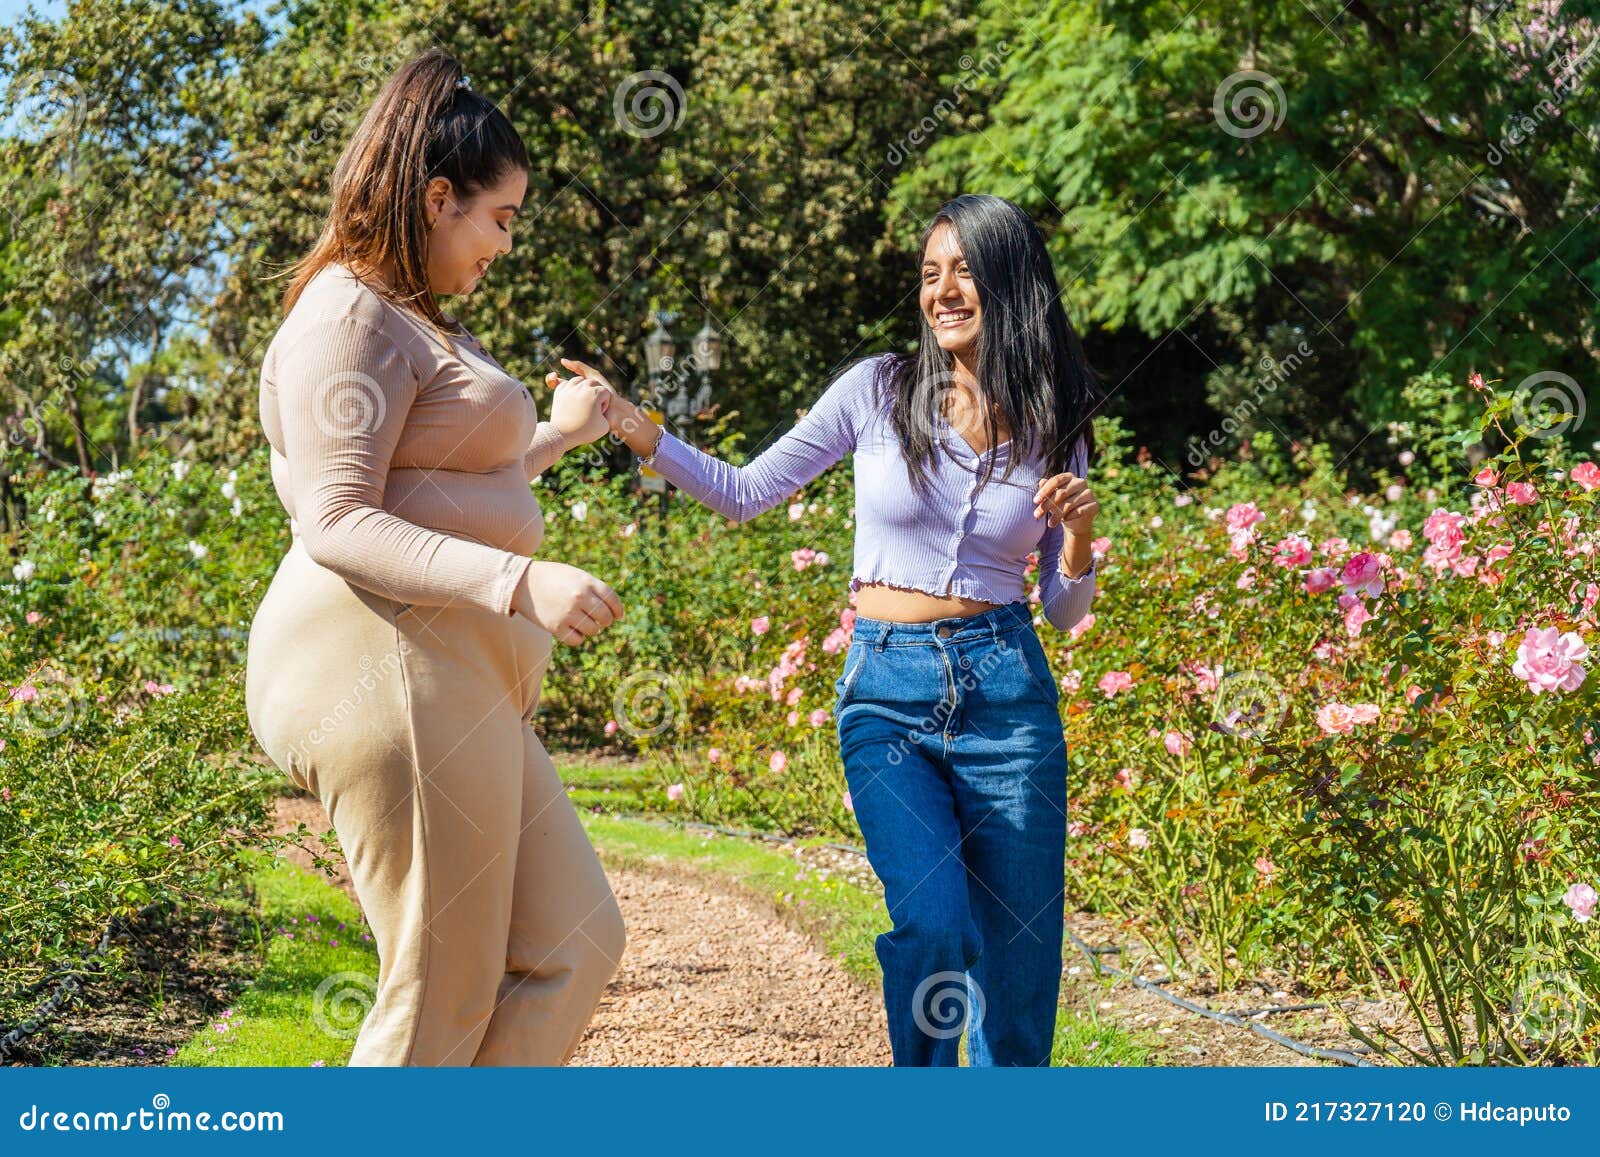 Two Young Girls Dancing In A Public Park Very Happy And Having Fun With